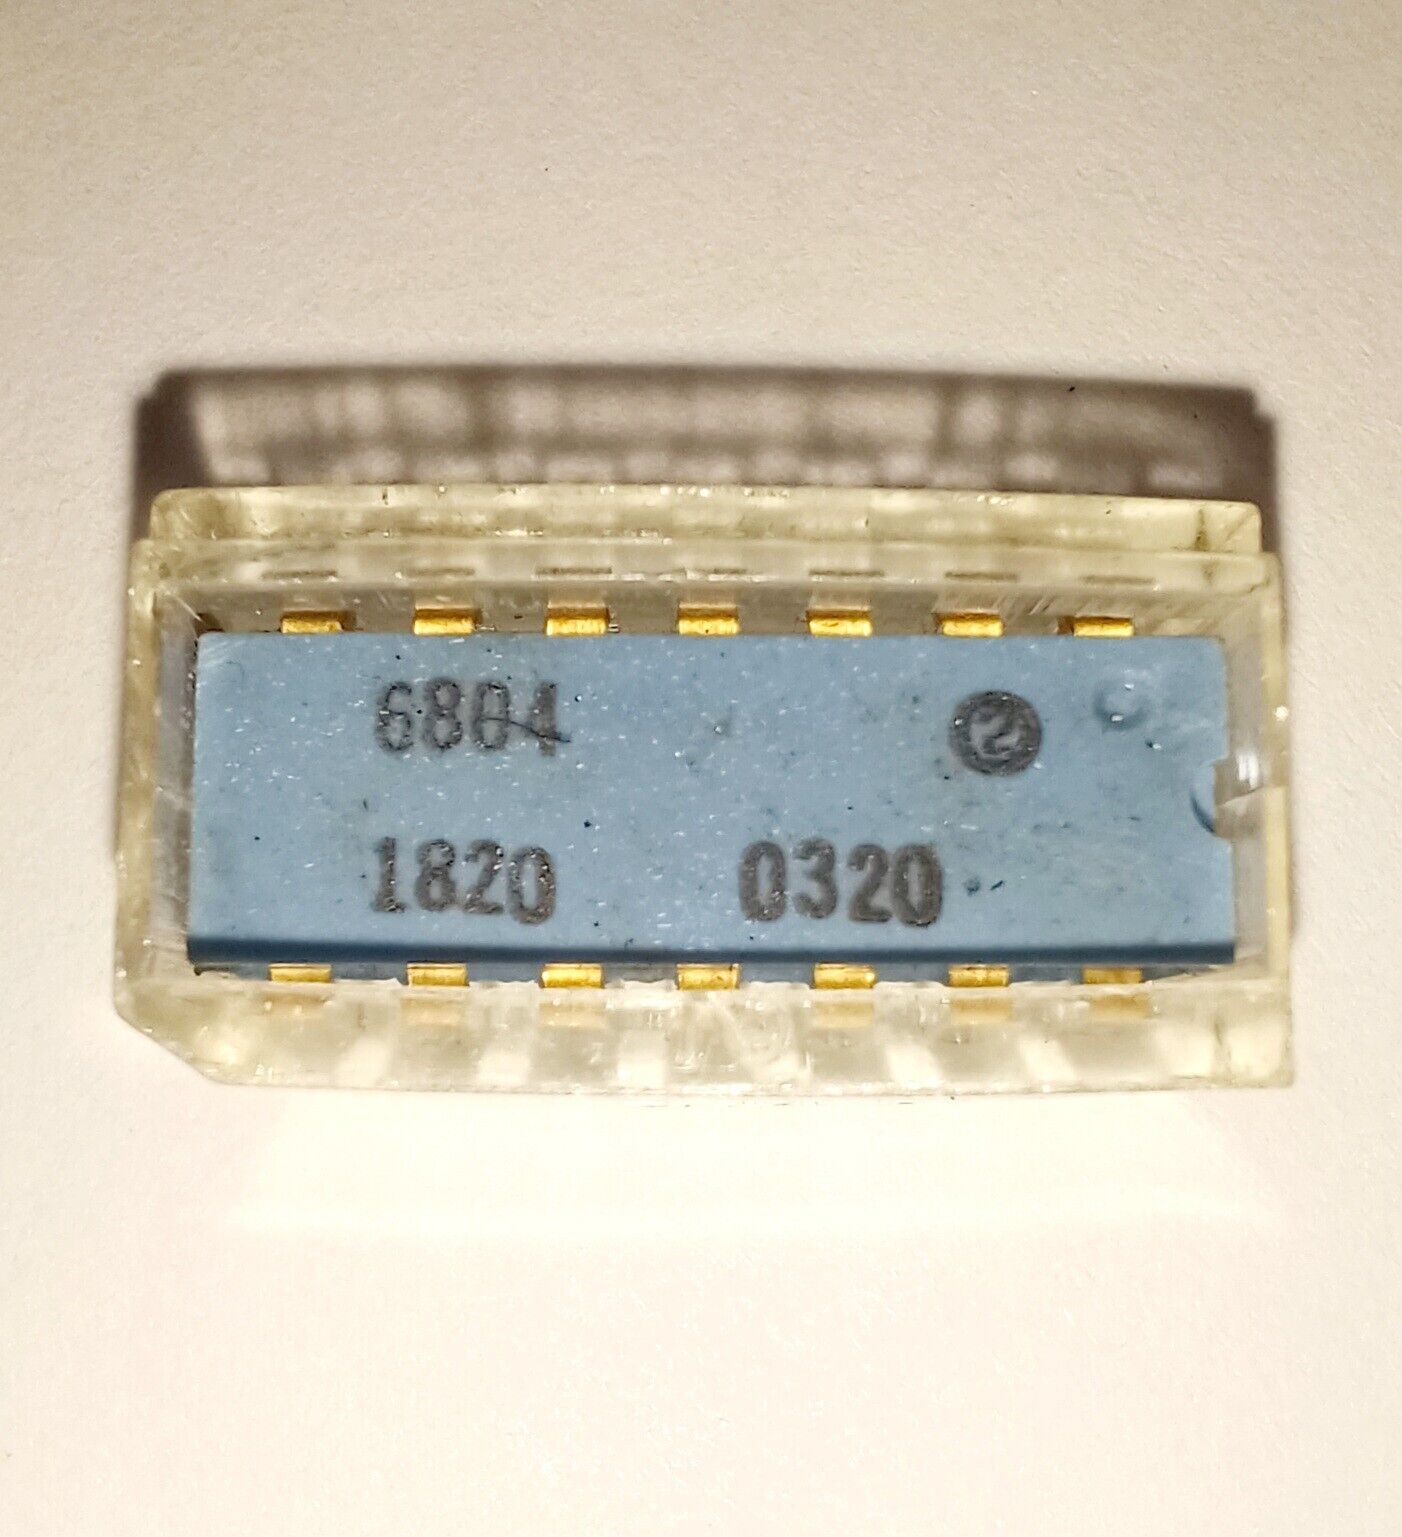 Sprague 1820 IC chip microchip DIP-14 vintage from 1968 Gold plated legs